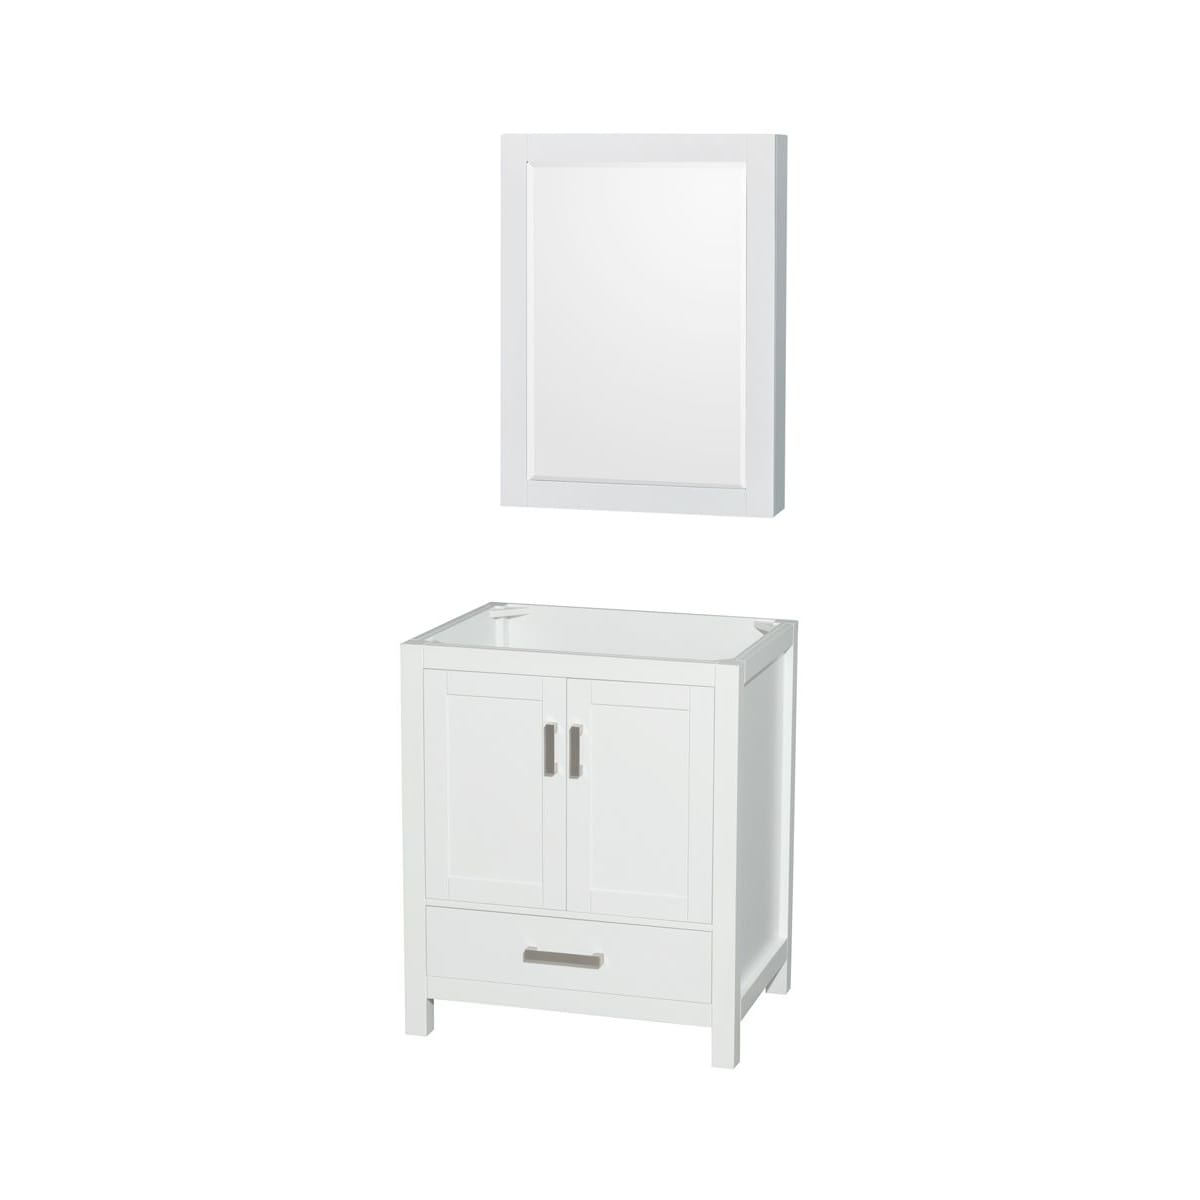 Wyndham Collection Wcs141430swhcxsxxmed White Sheffield 30